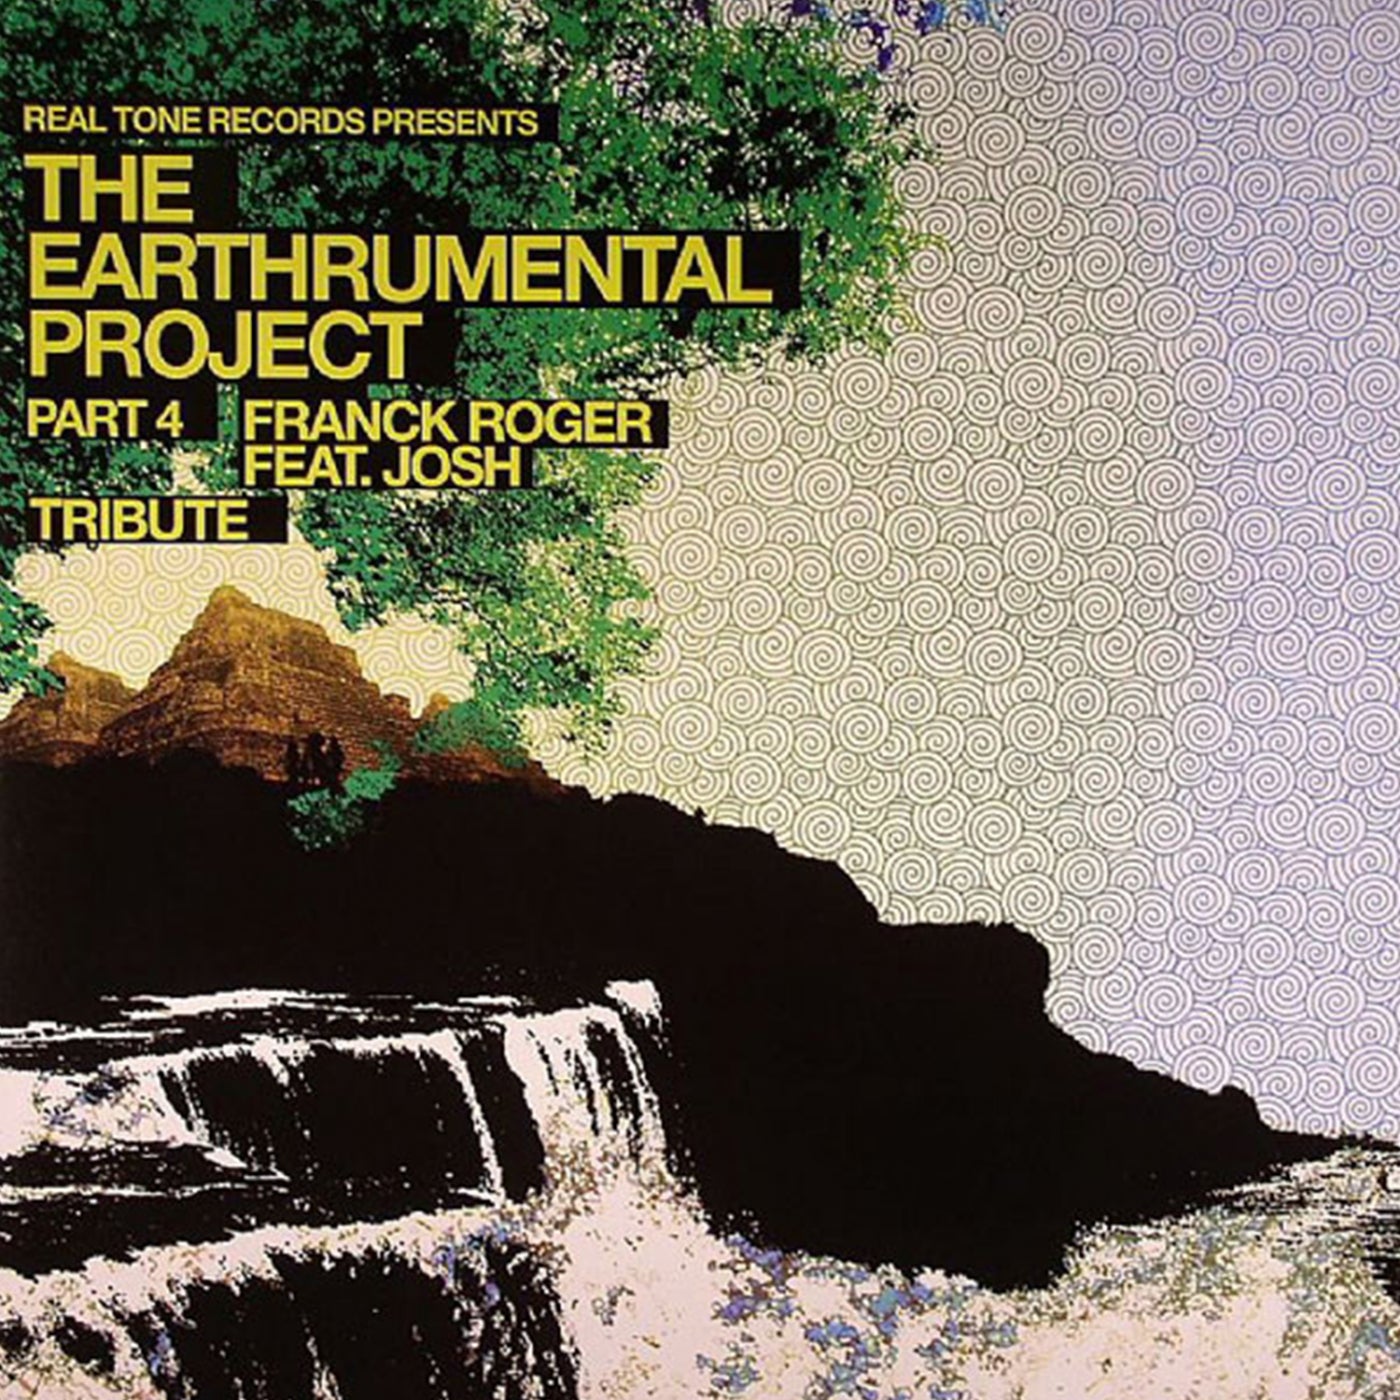 Download The Earthrumental Project Part 4 on Electrobuzz